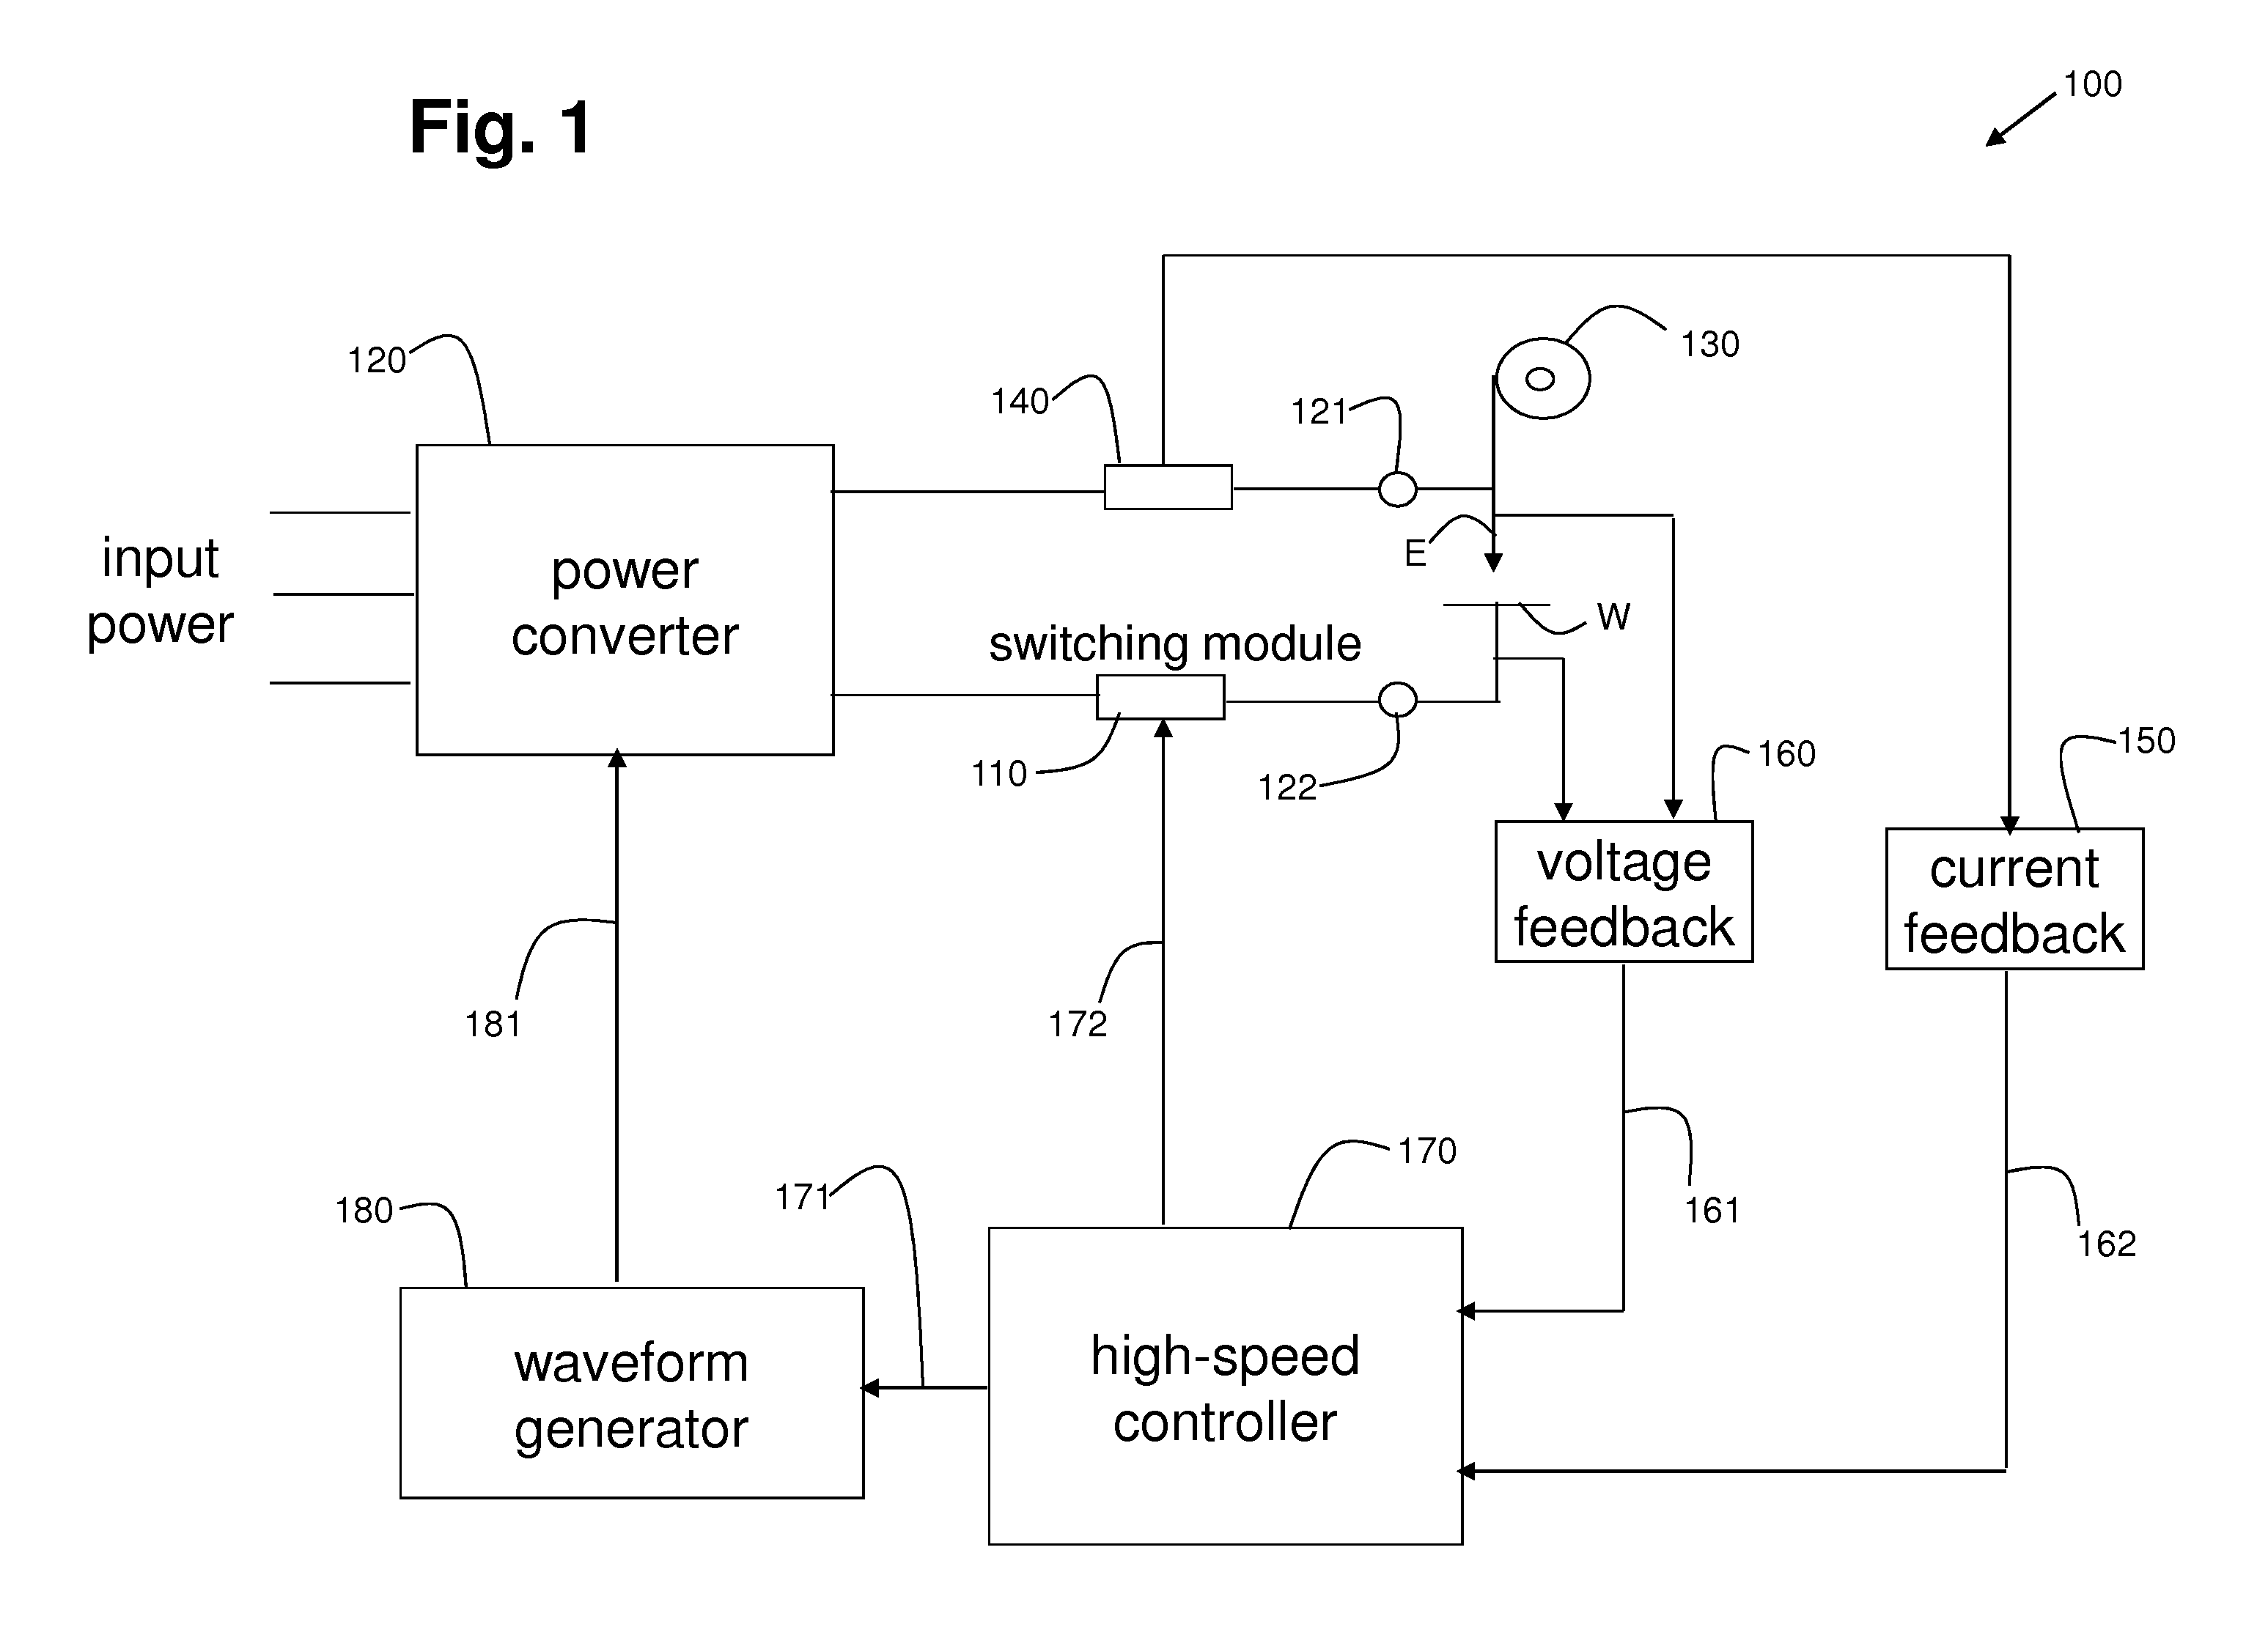 Method to control an arc welding system to reduce spatter